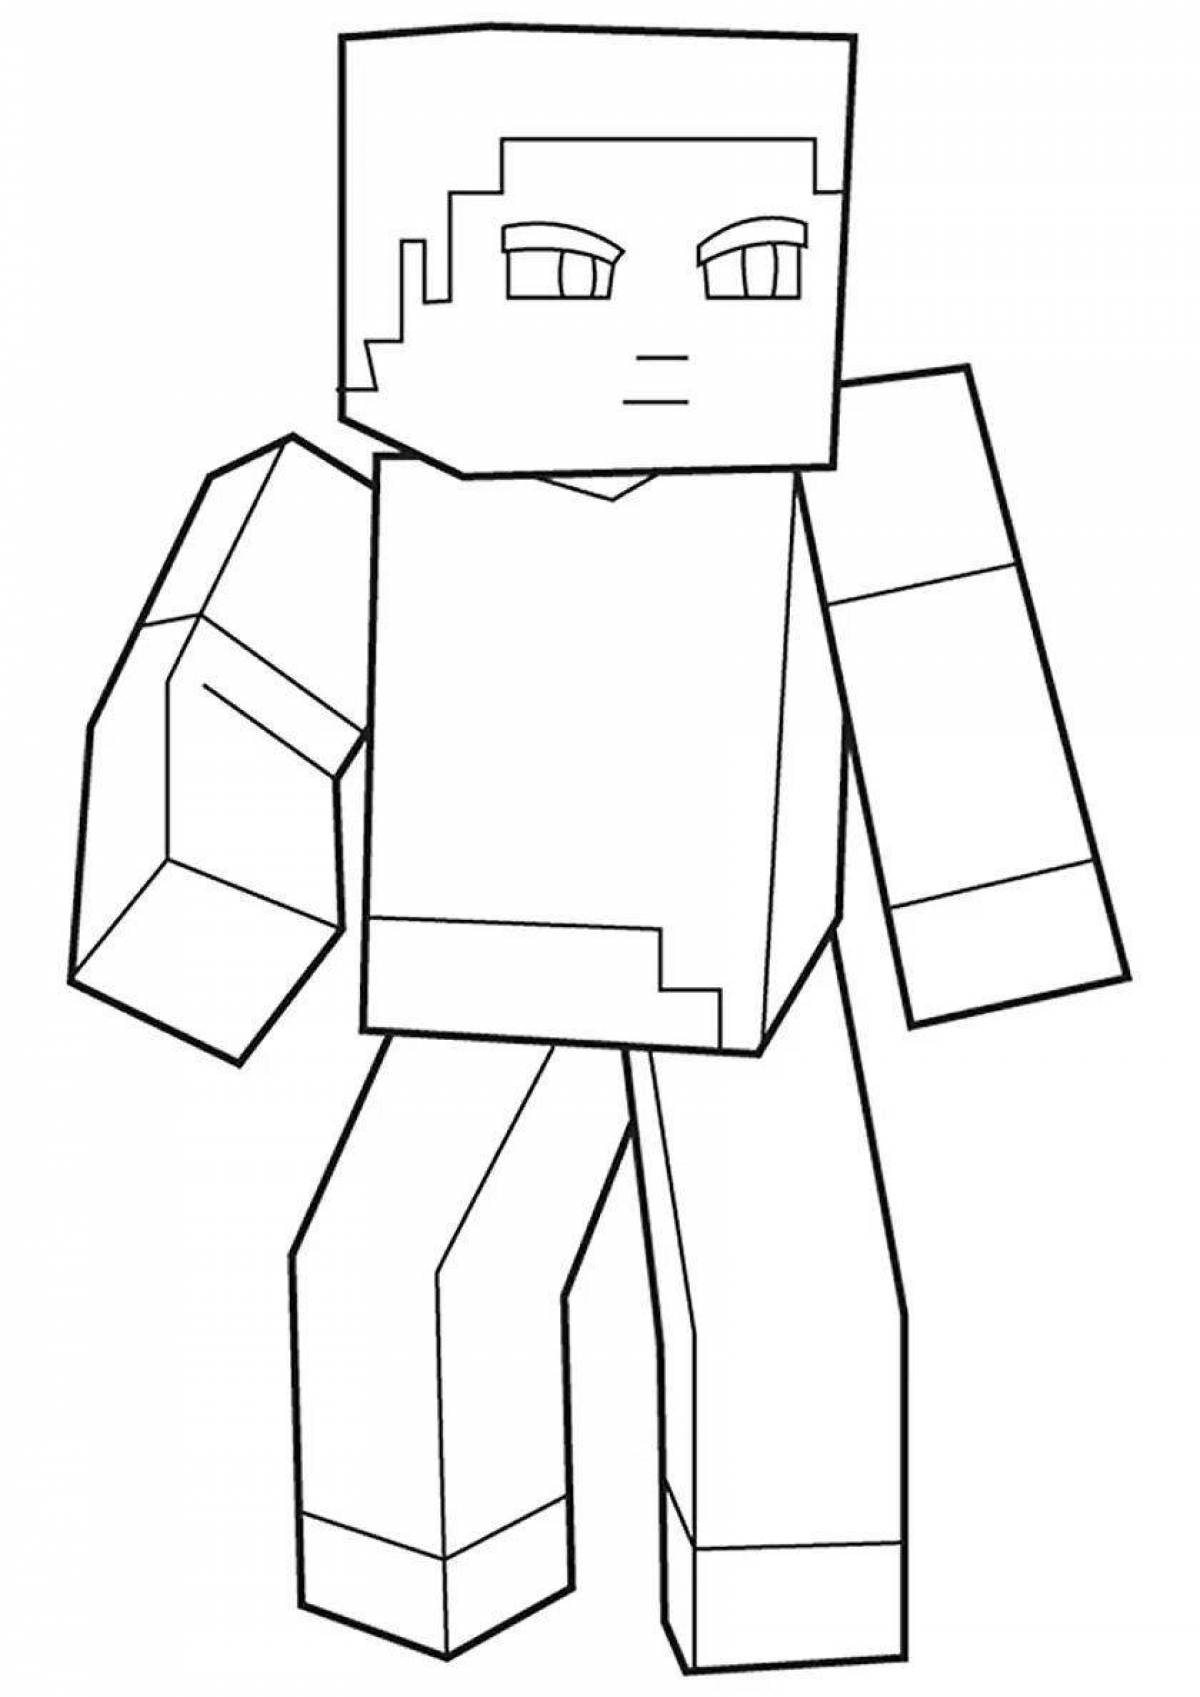 Innovative minecraft robot coloring page